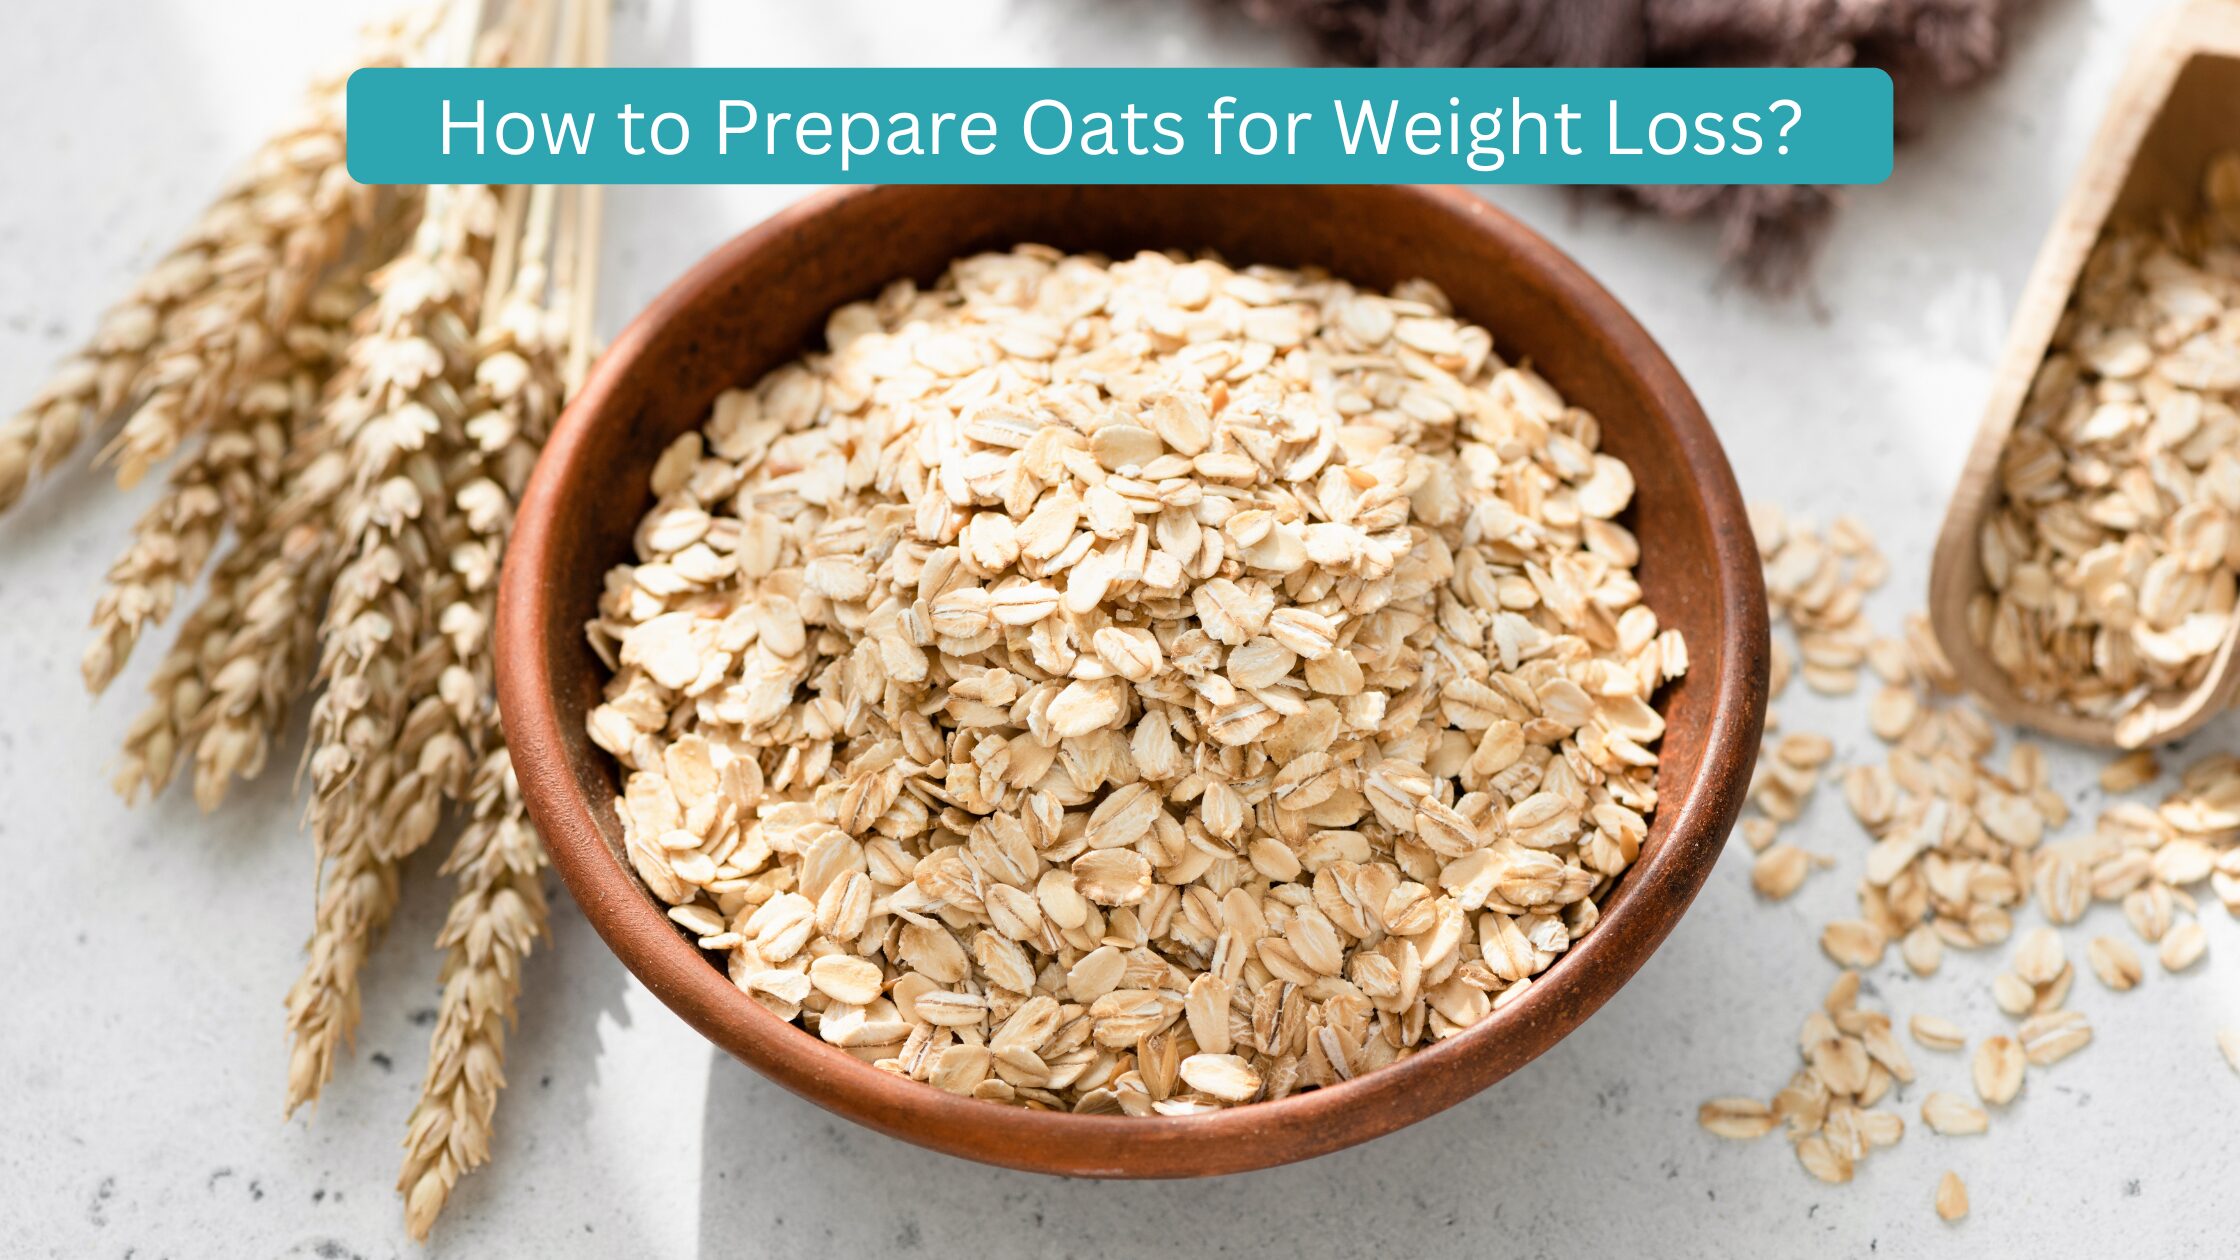 How to Prepare Oats for Weight Loss?